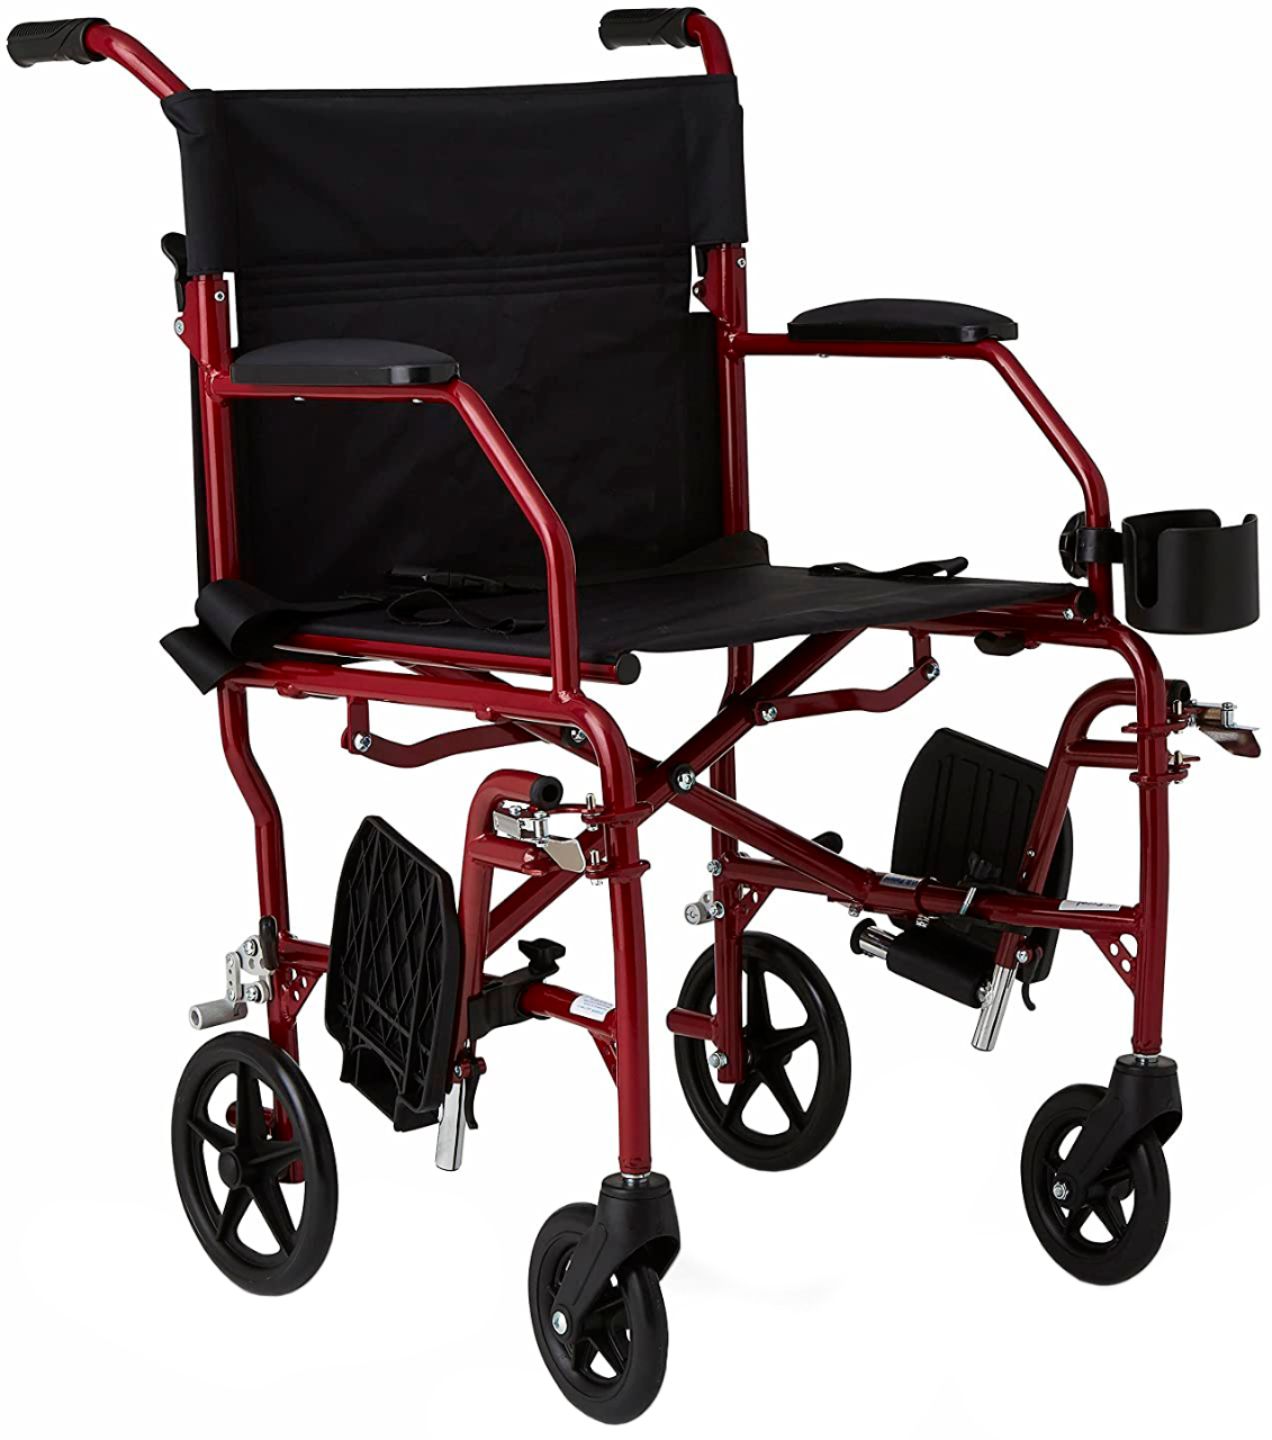 Medline Ultralight Transport Wheelchair with 19” Seat, Folding Transport Chair with Permanent Desk-Length Arms, Red - Red